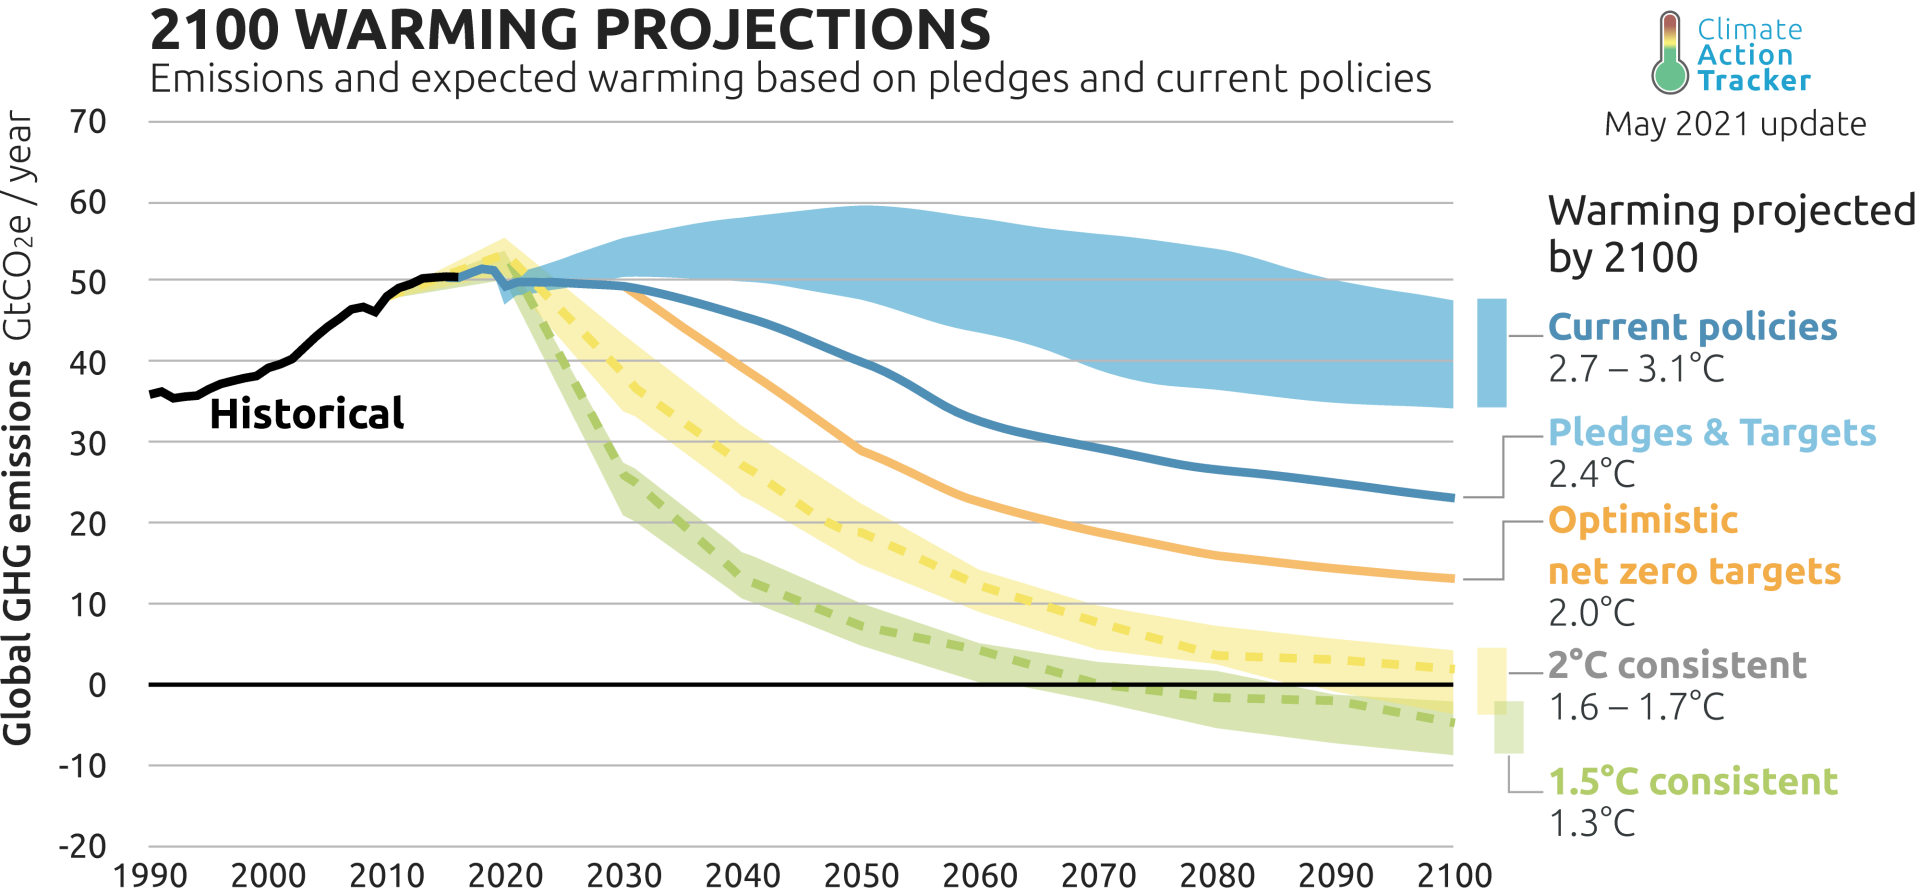 global warming projections from the Climate Action Tracker